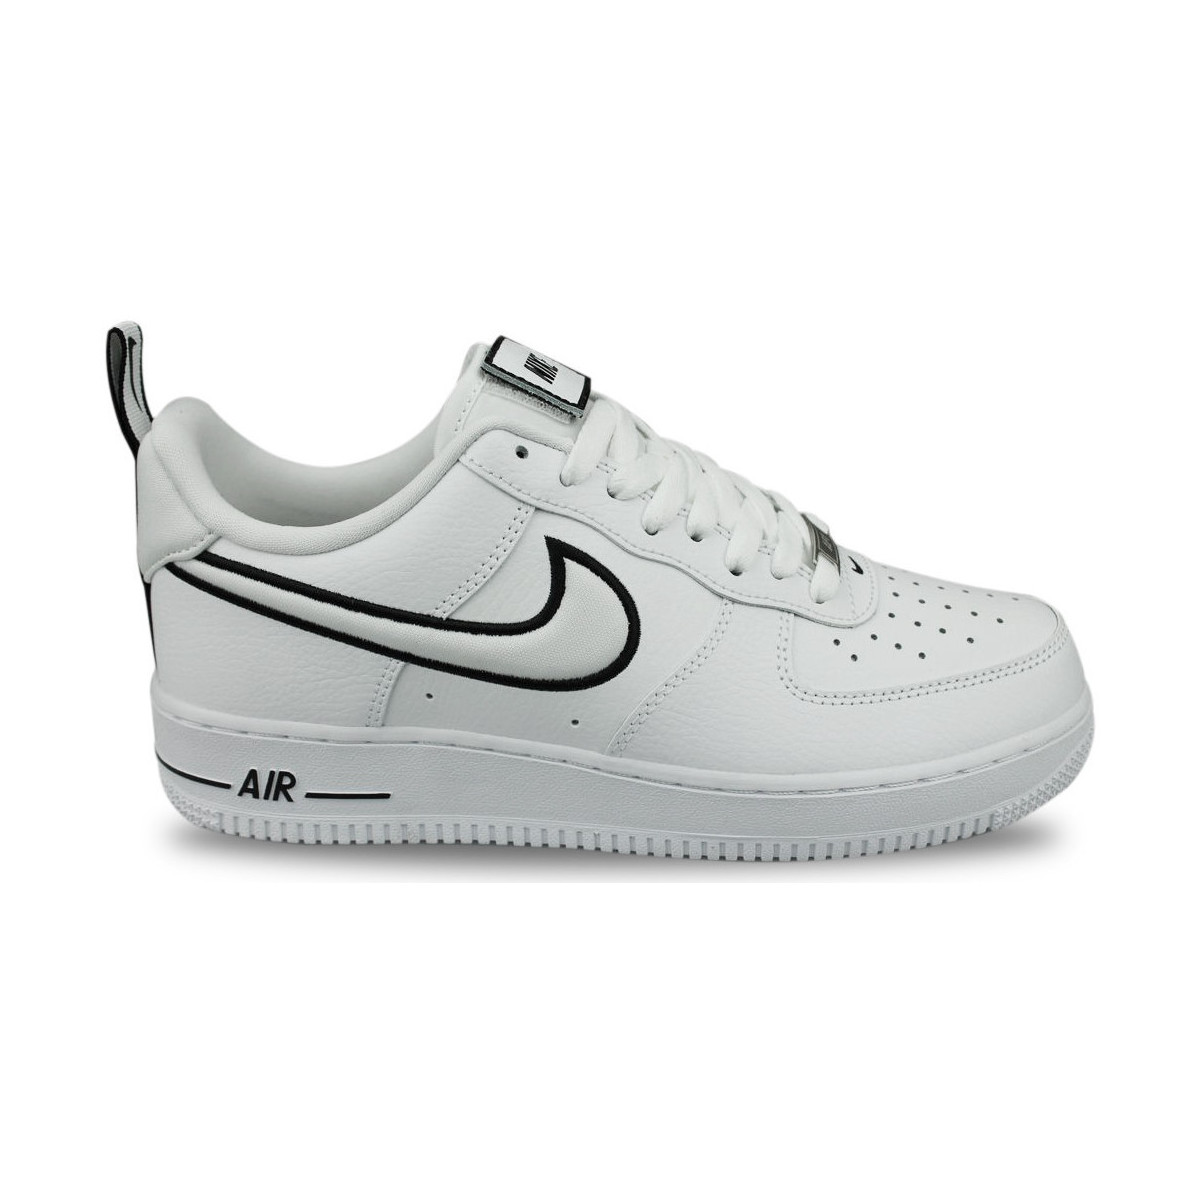 Nike Blanc Air Force 1 Low Outline Swoosh White yYVhln5